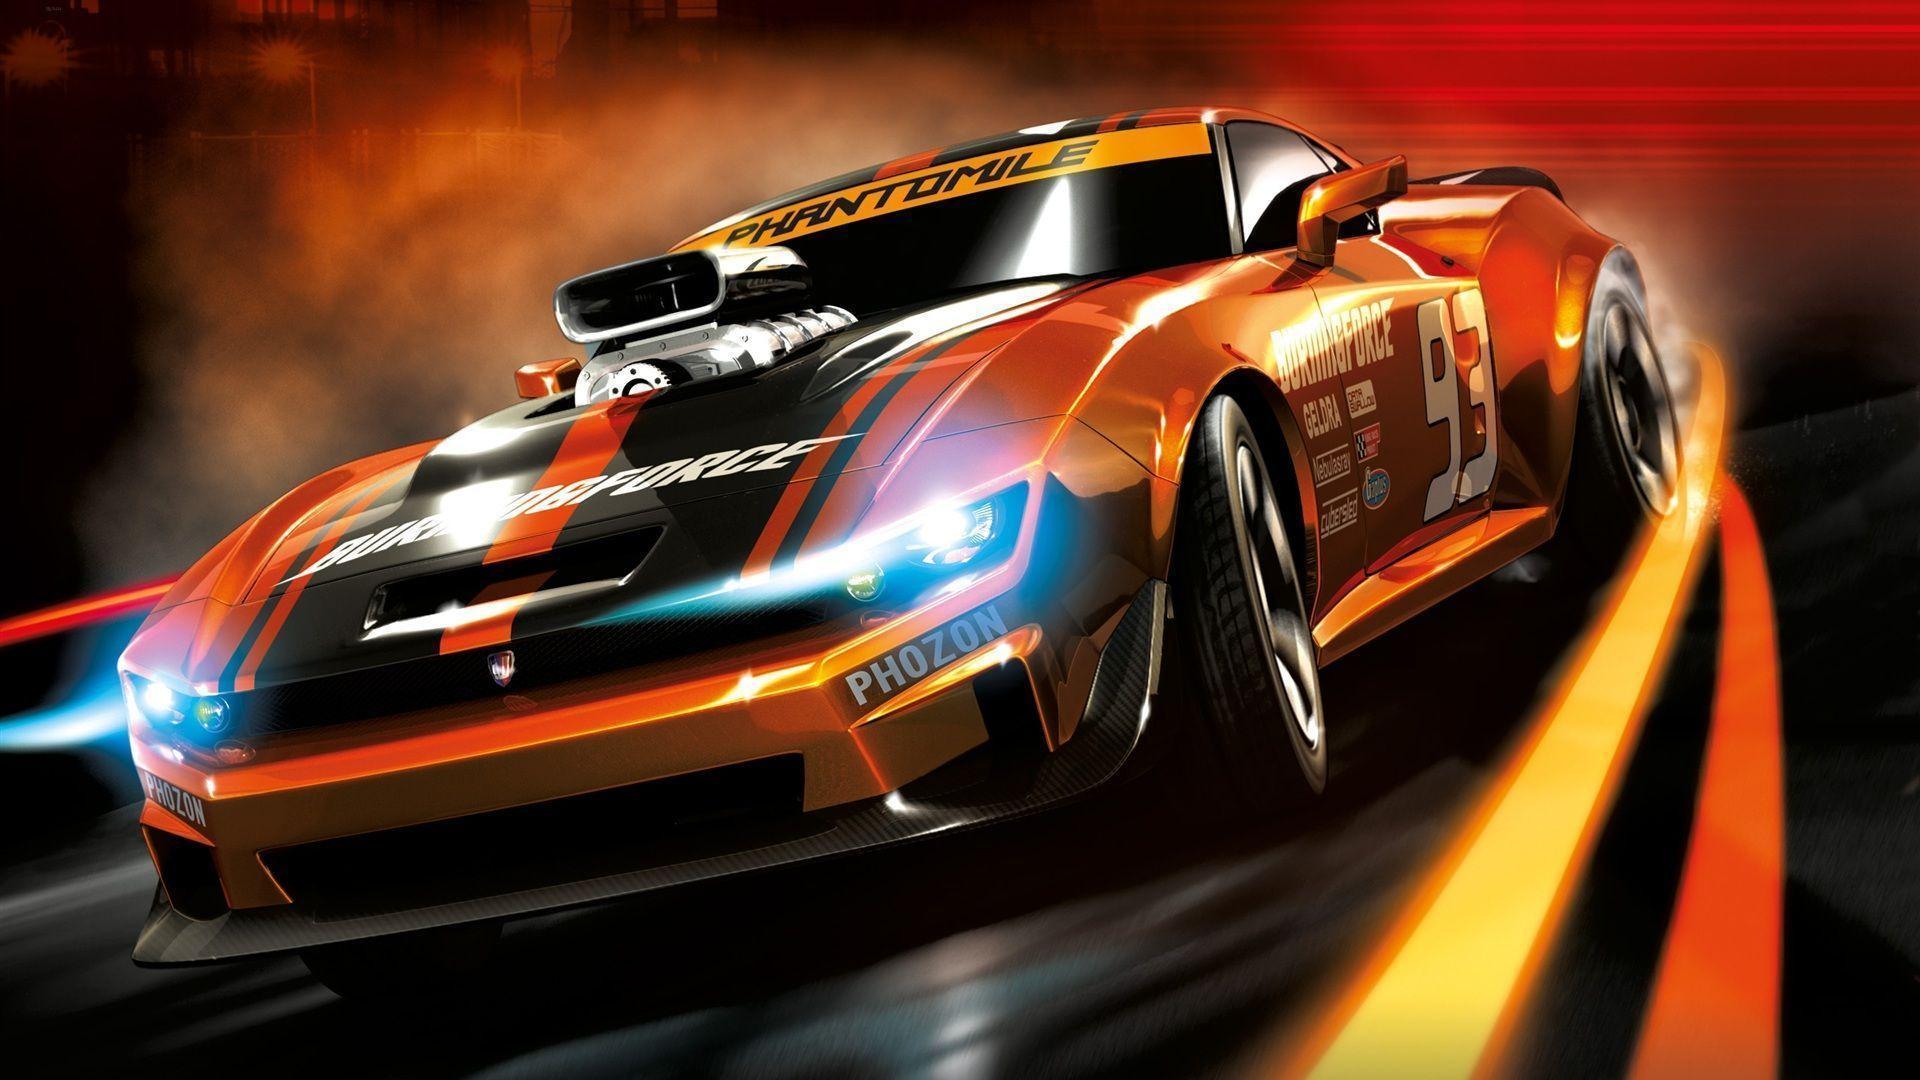 Awesome Car Racing Wallpaper Picture 13007 Full HD Wallpaper